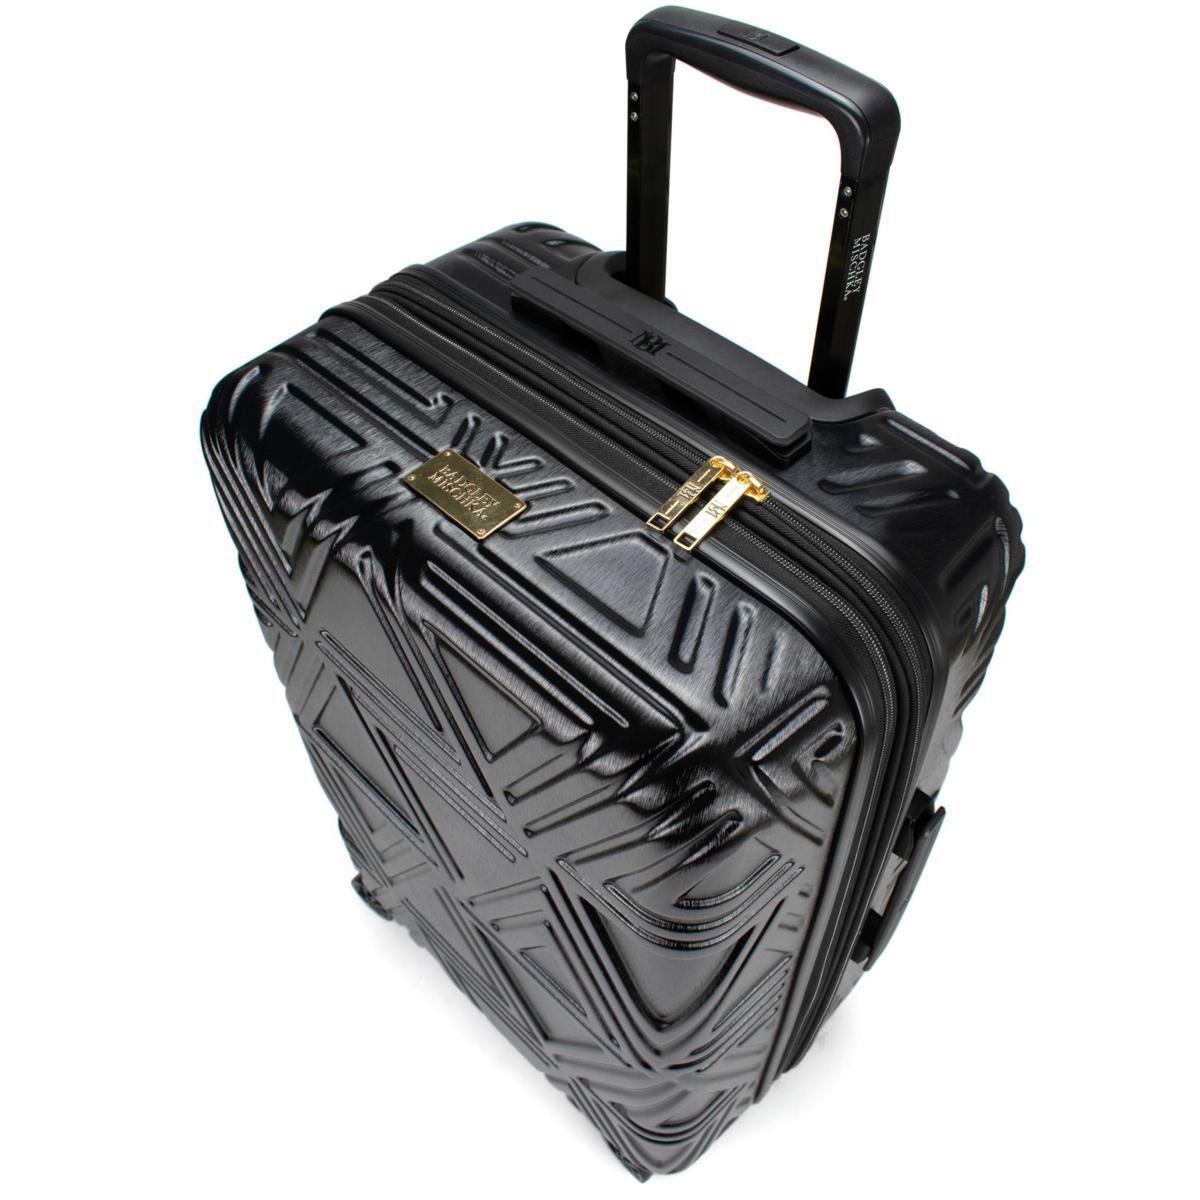 Badgley Mischka ABS Luggage 4 Wheels - Black - PICK UP ONLY - Dollars and Sense